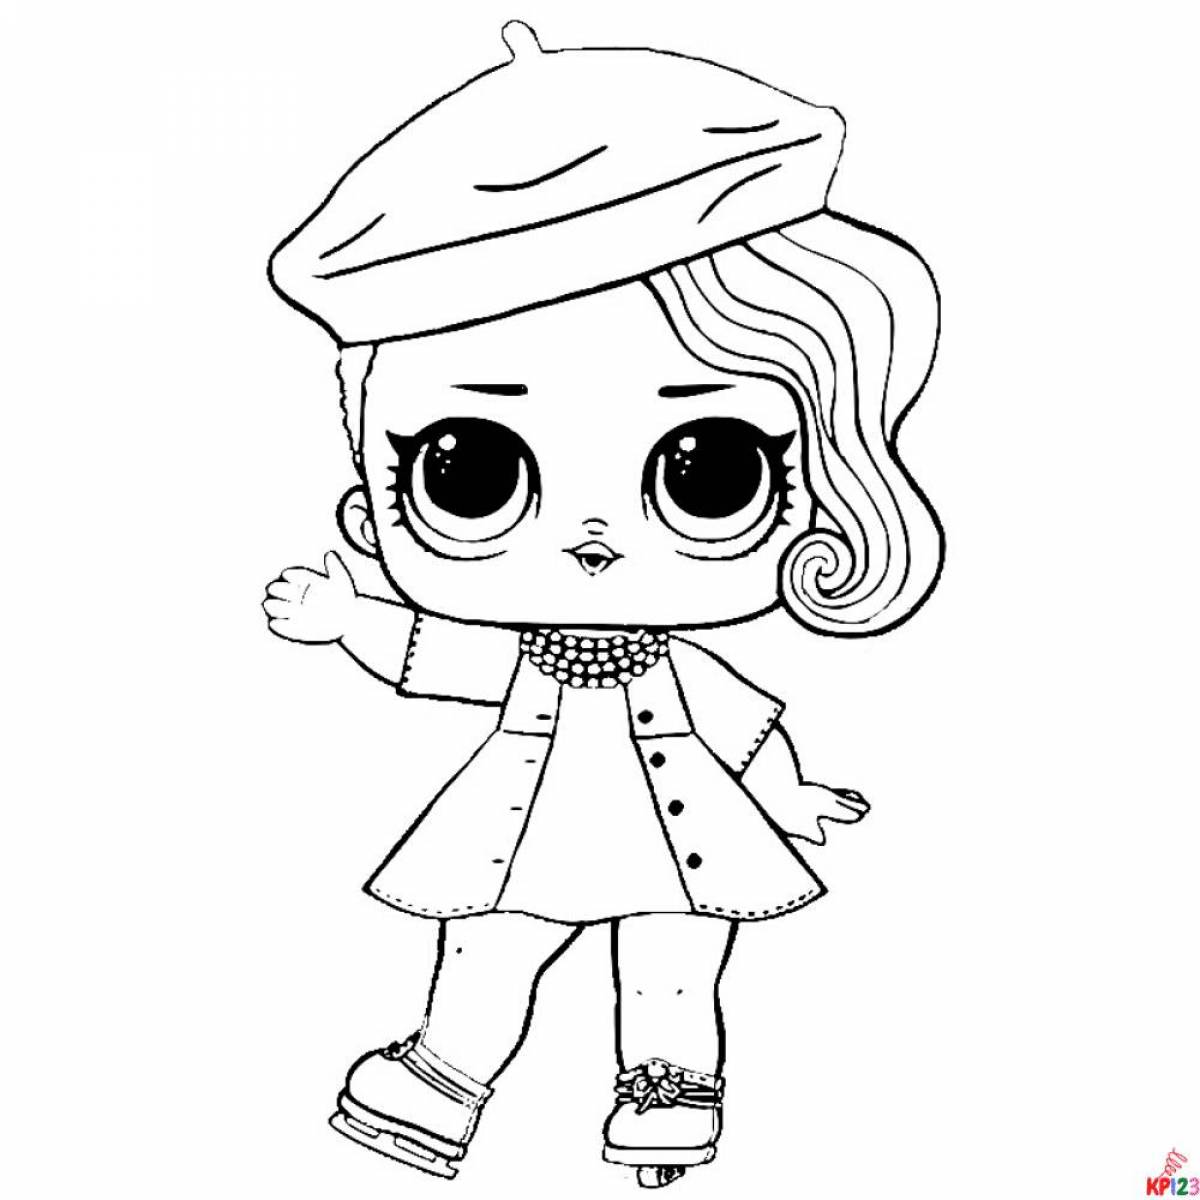 Coloring gorgeous lola doll